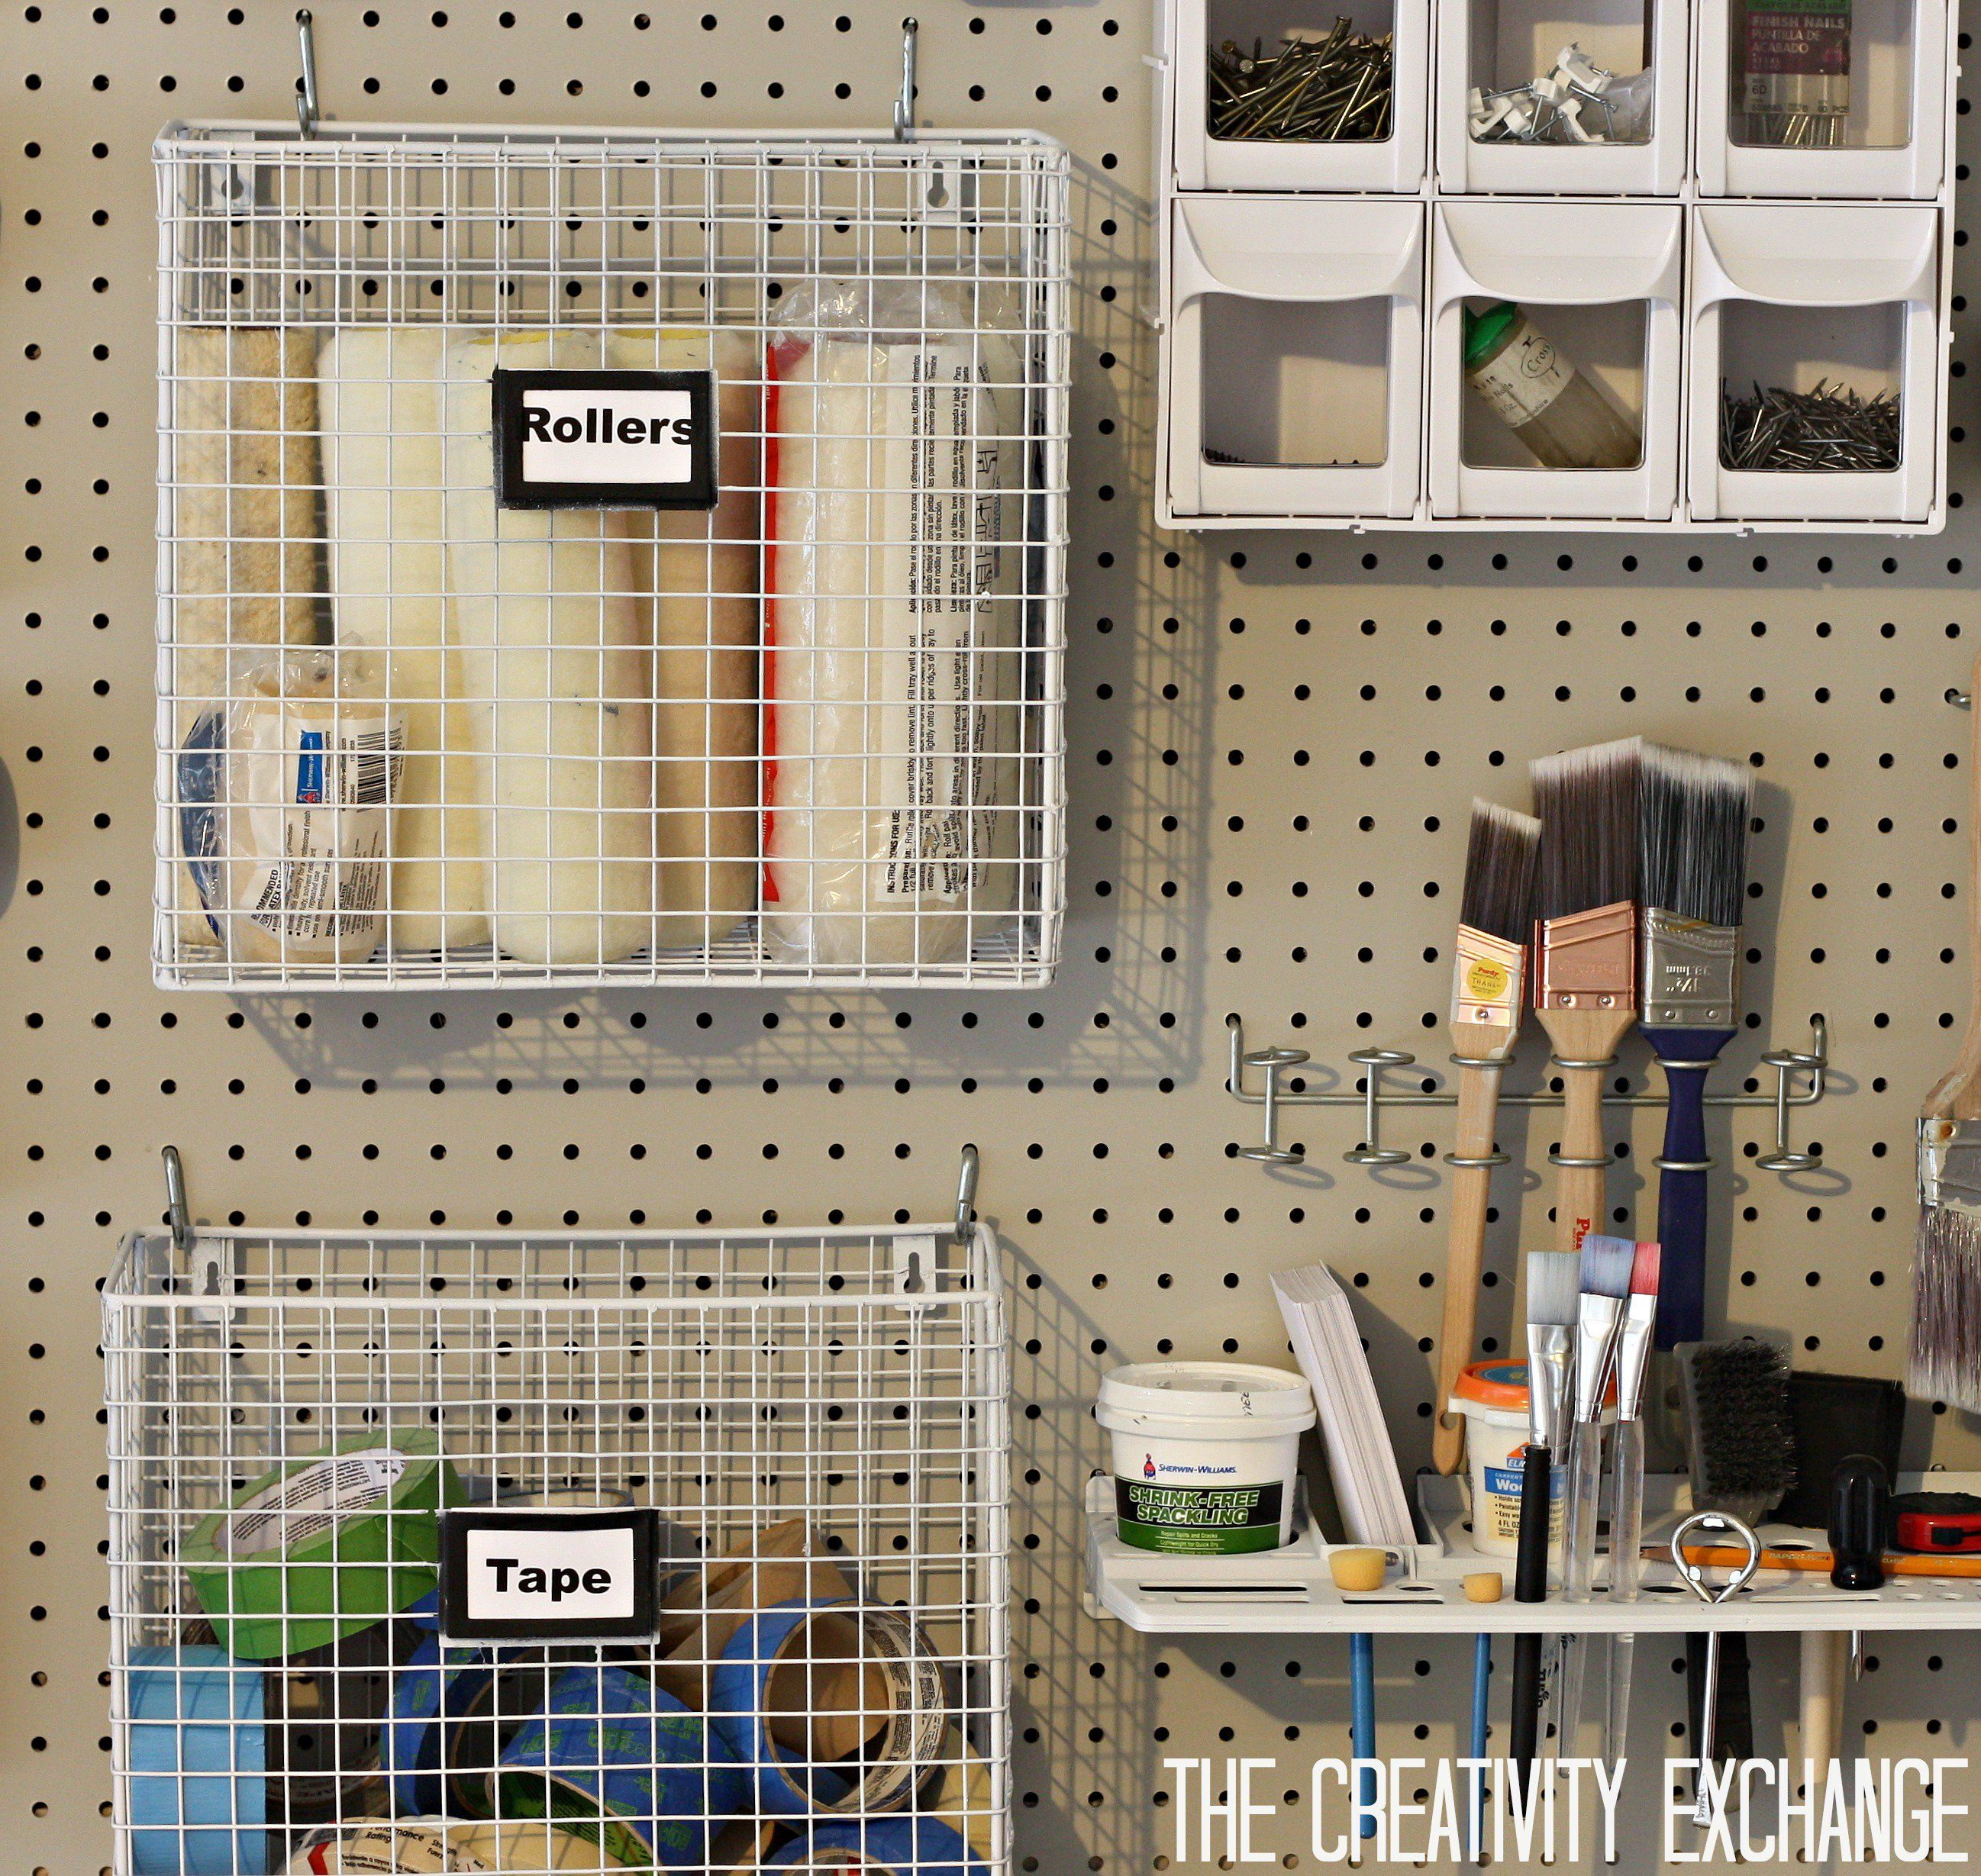 Organizing The Garage With Diy Pegboard Storage Wall 001 in dimensions 2595 X 2458